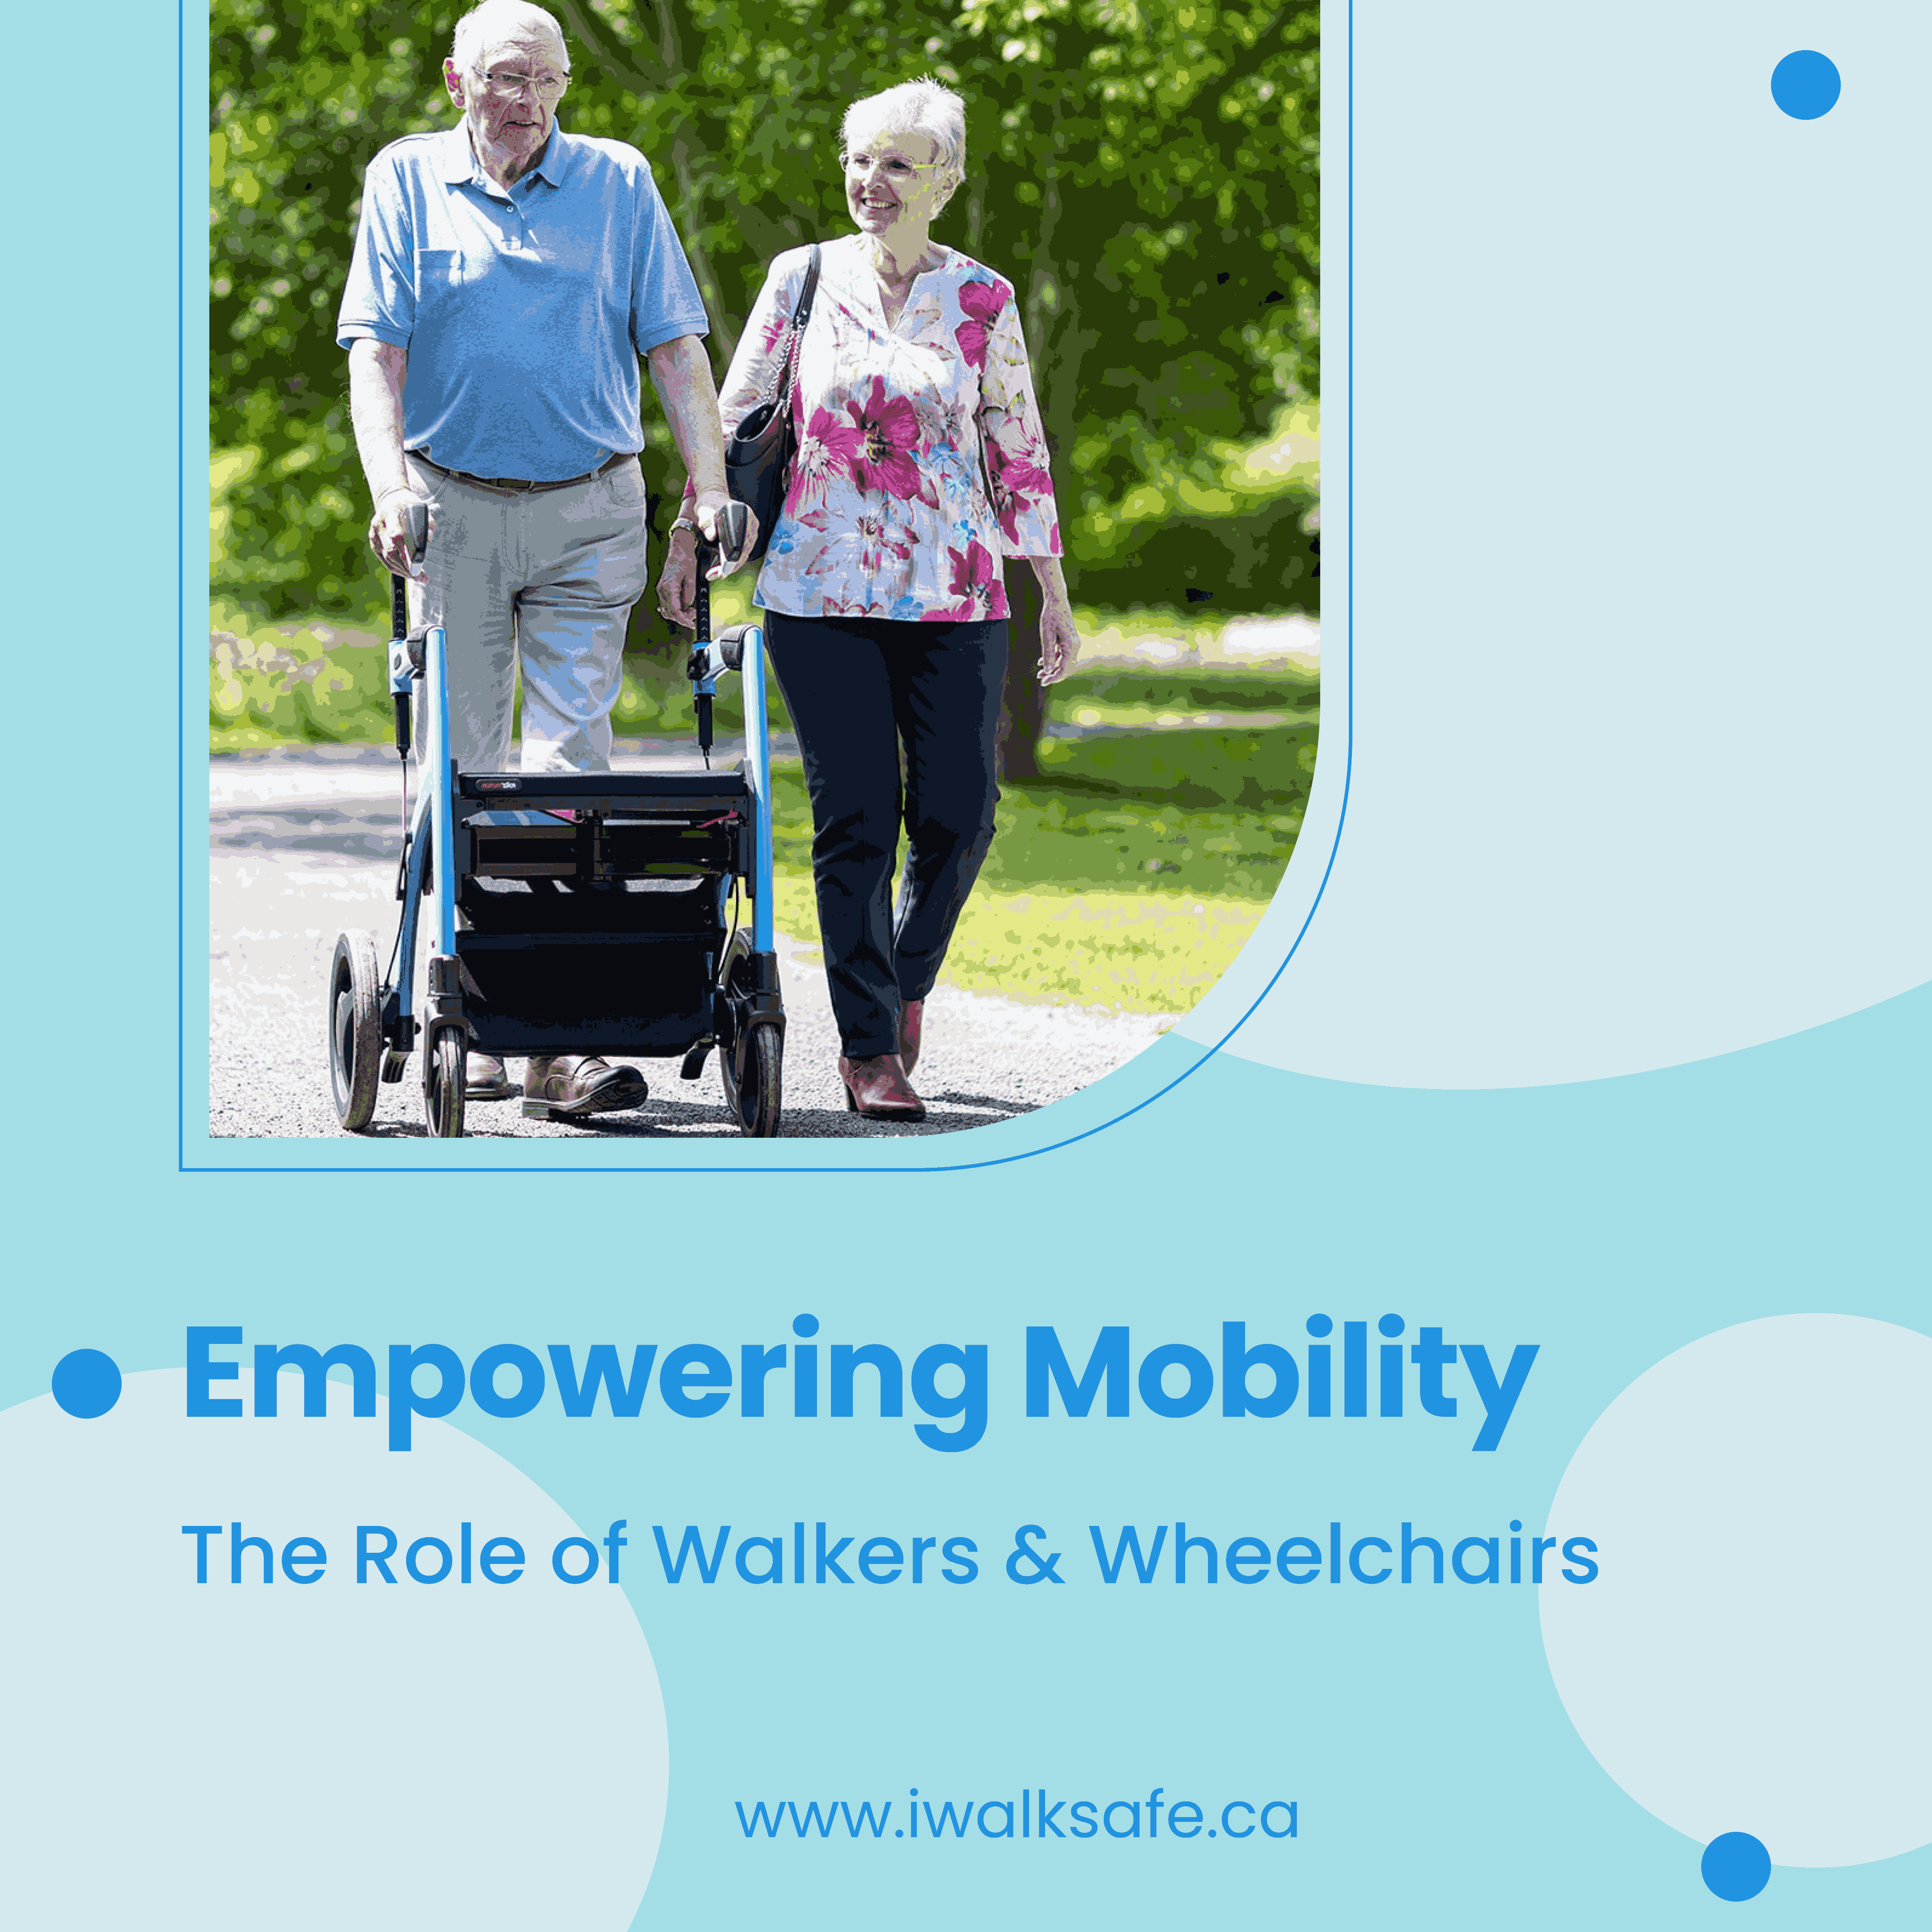 “Empowering Mobility: The Role of Walkers & Wheelchairs”